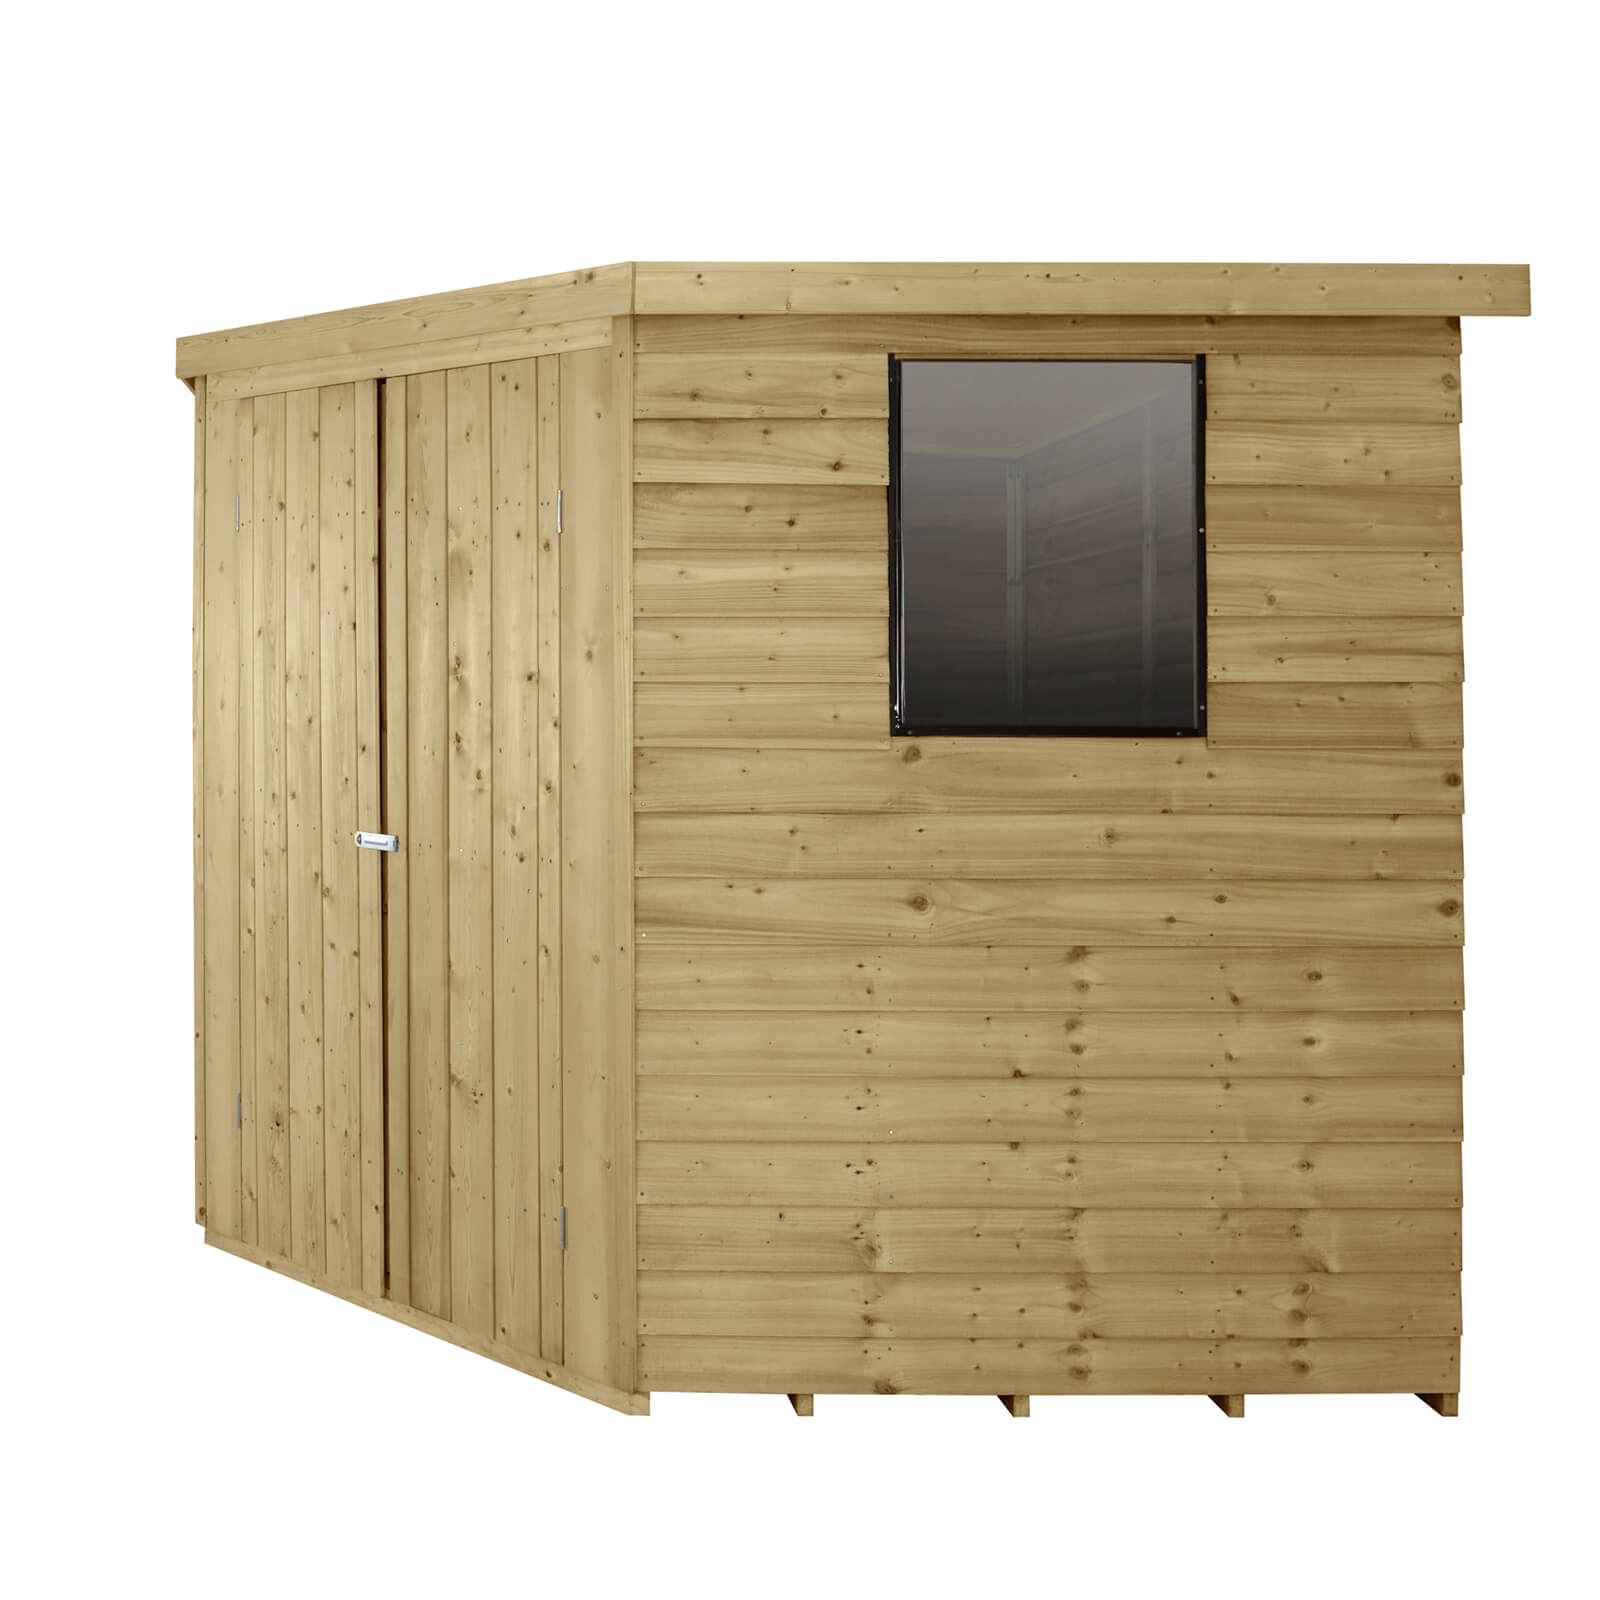 8x8ft Forest Overlap Pressure Treated Corner Shed